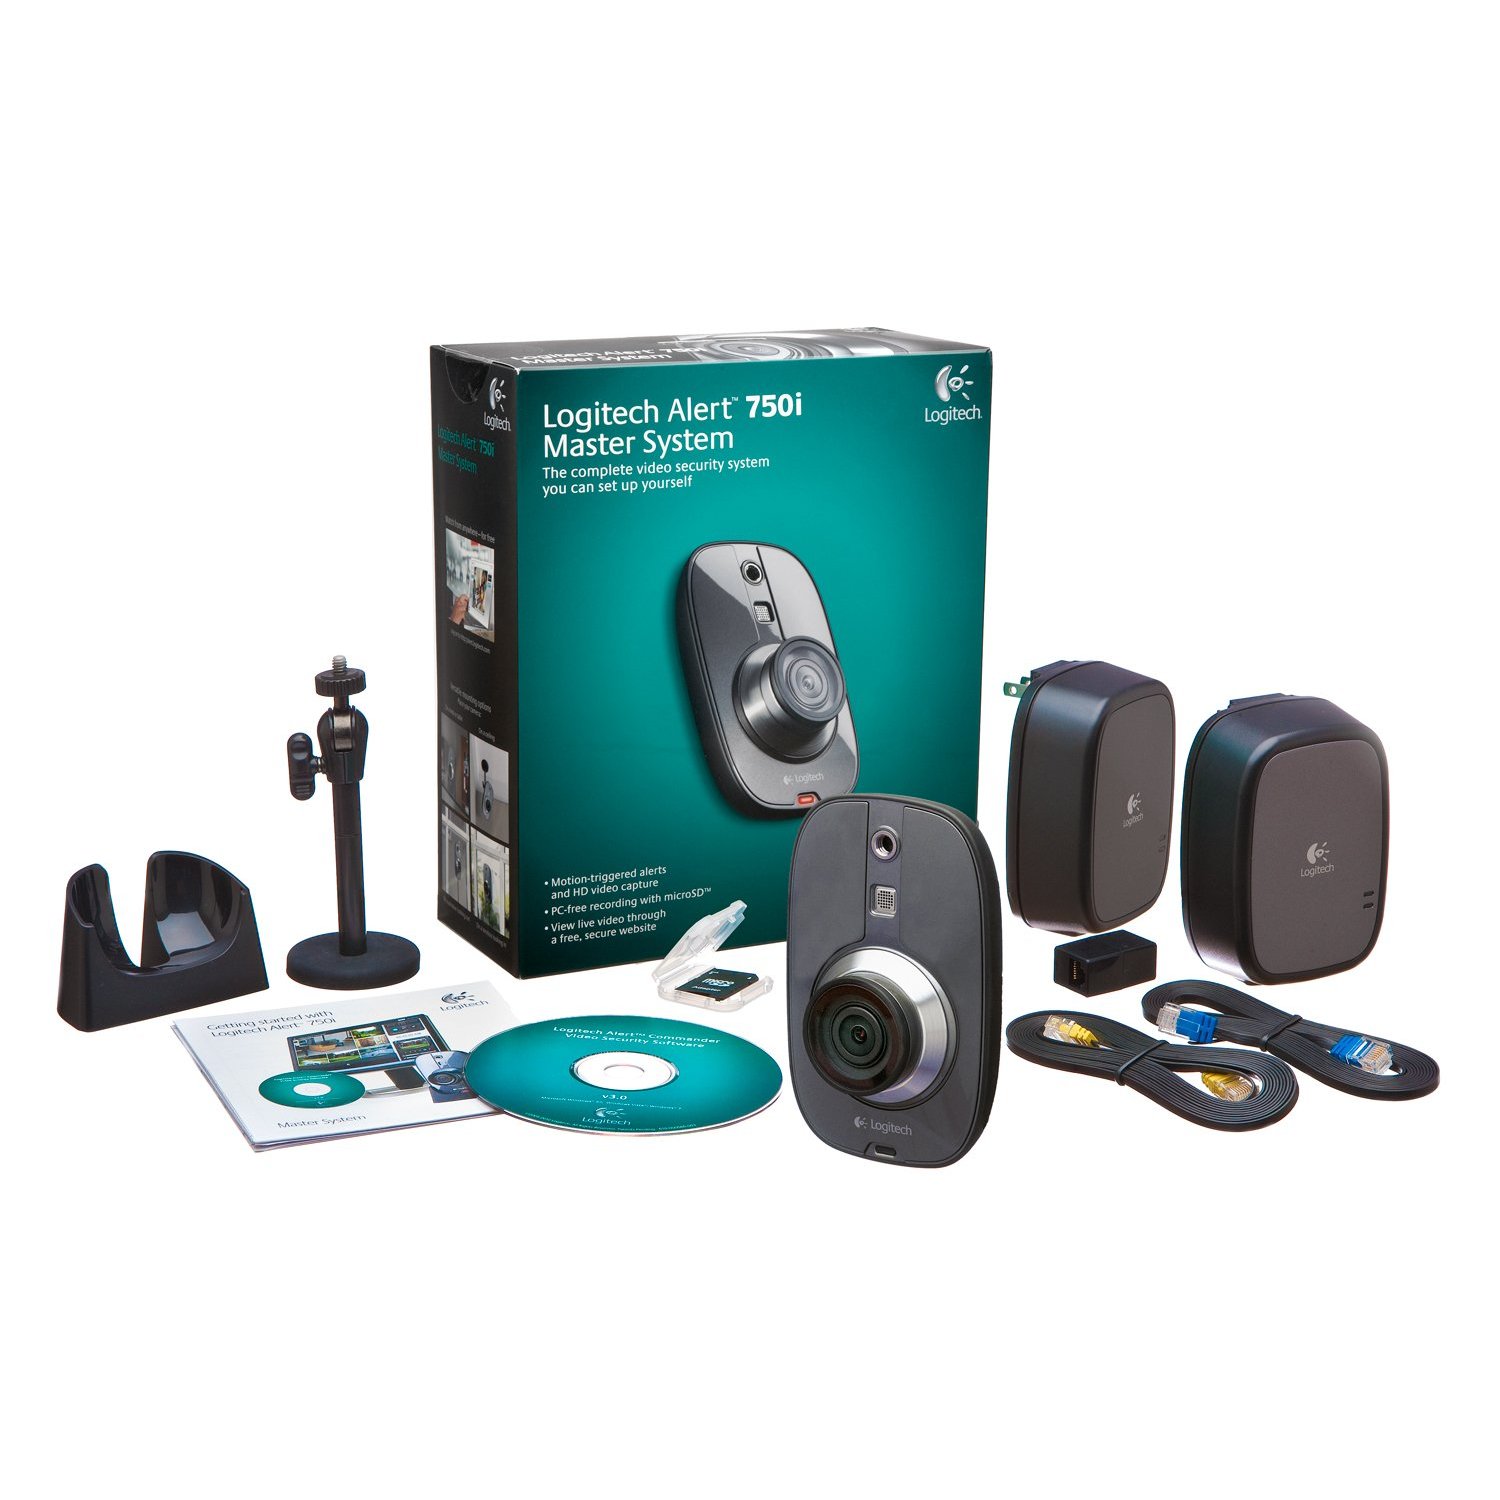 http://thetechjournal.com/wp-content/uploads/images/1110/1319469063-logitech-alert-750i-indoor-master--hdquality-security-system-7.jpg